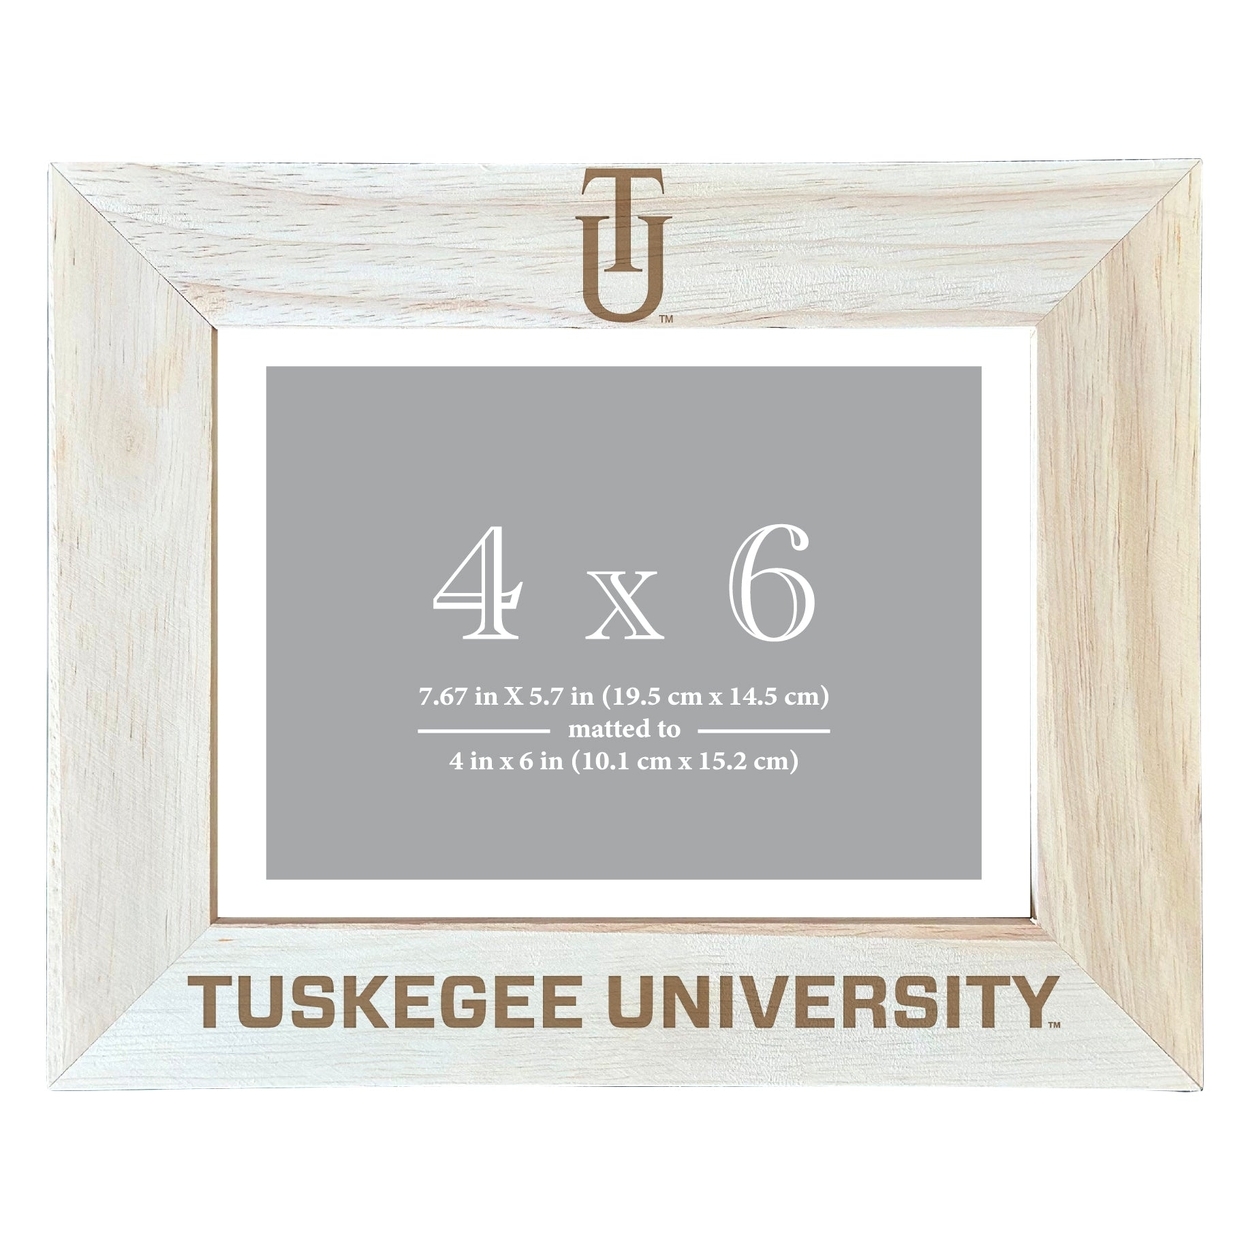 Tuskegee University Wooden Photo Frame Matted To 4 X 6 Inch - Etched